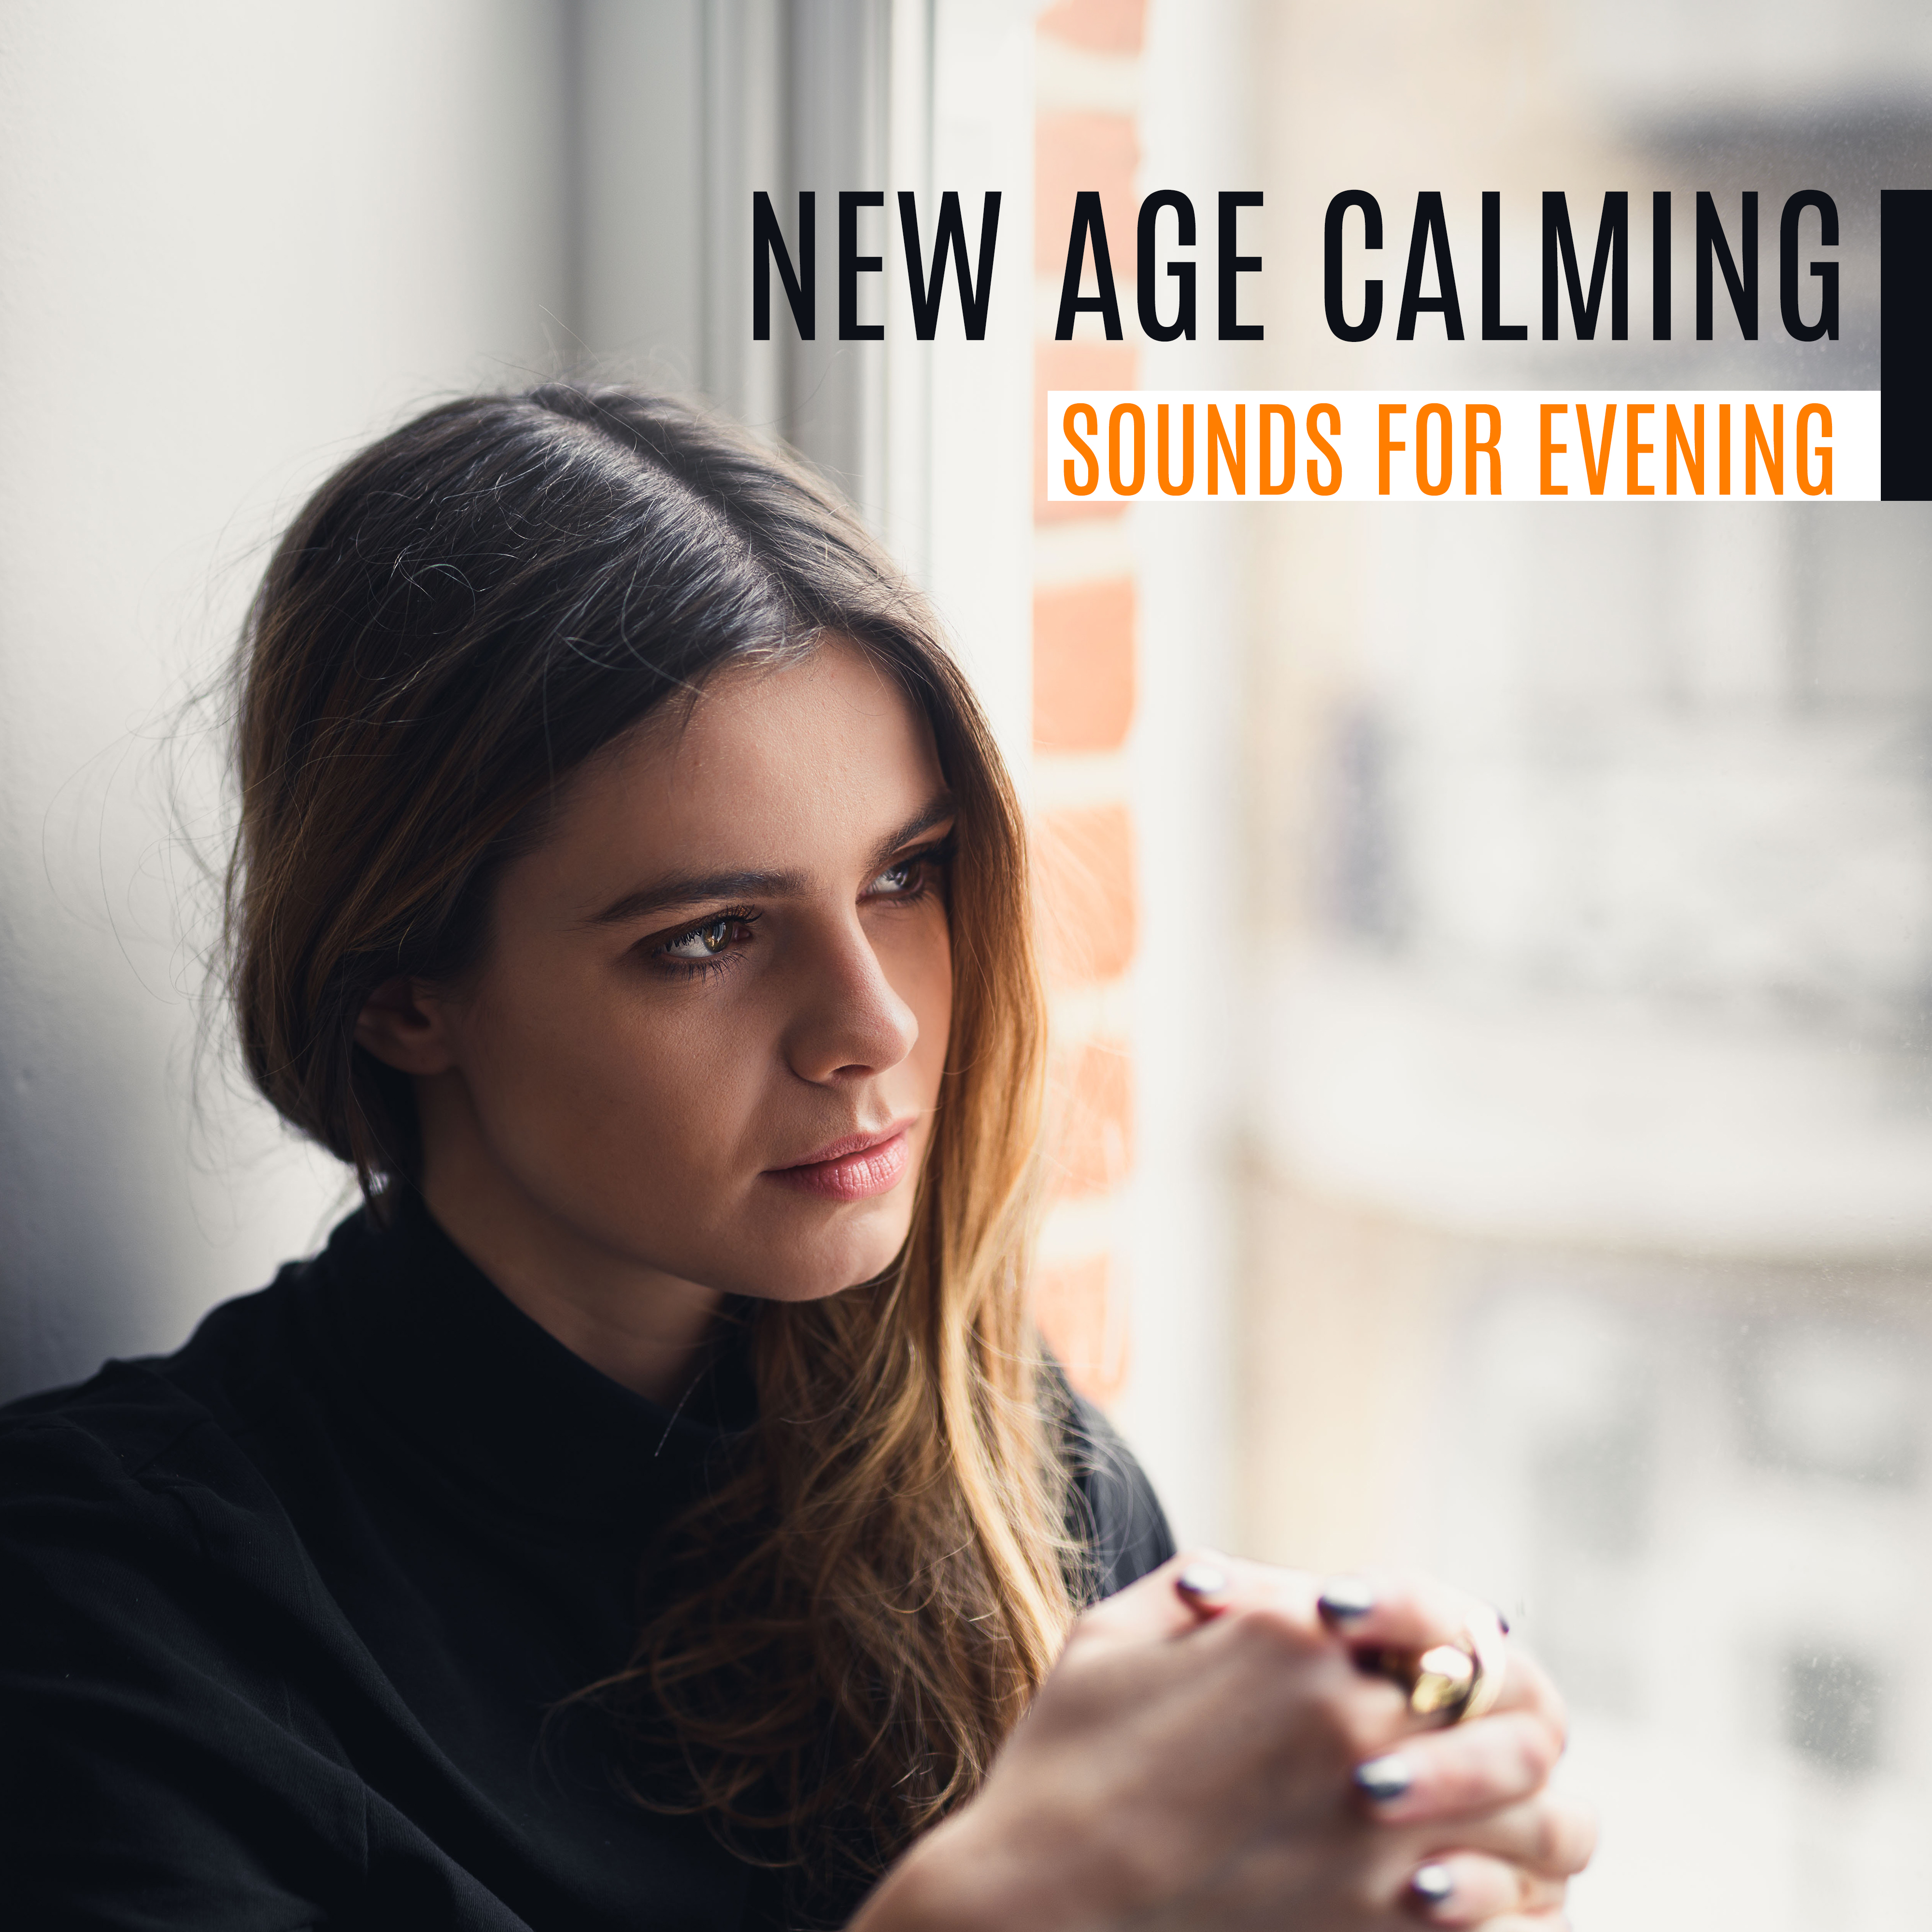 New Age Calming Sounds for Evening